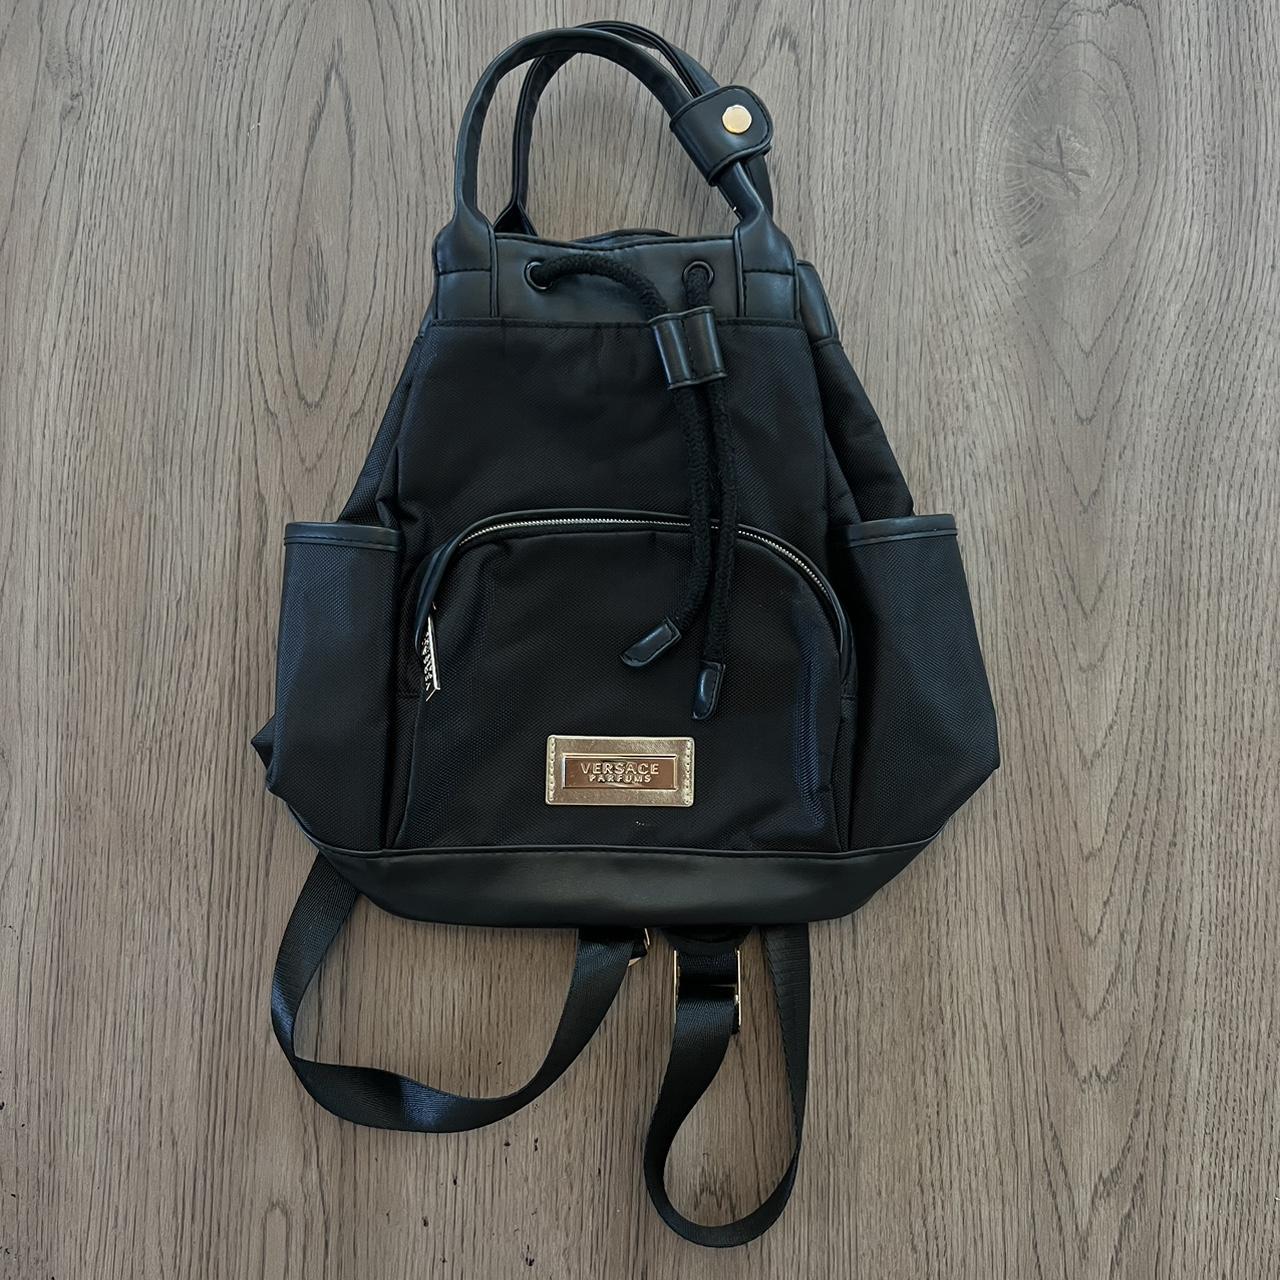 Versace Backpack🖤 small authentic backpack ✨2... - Depop